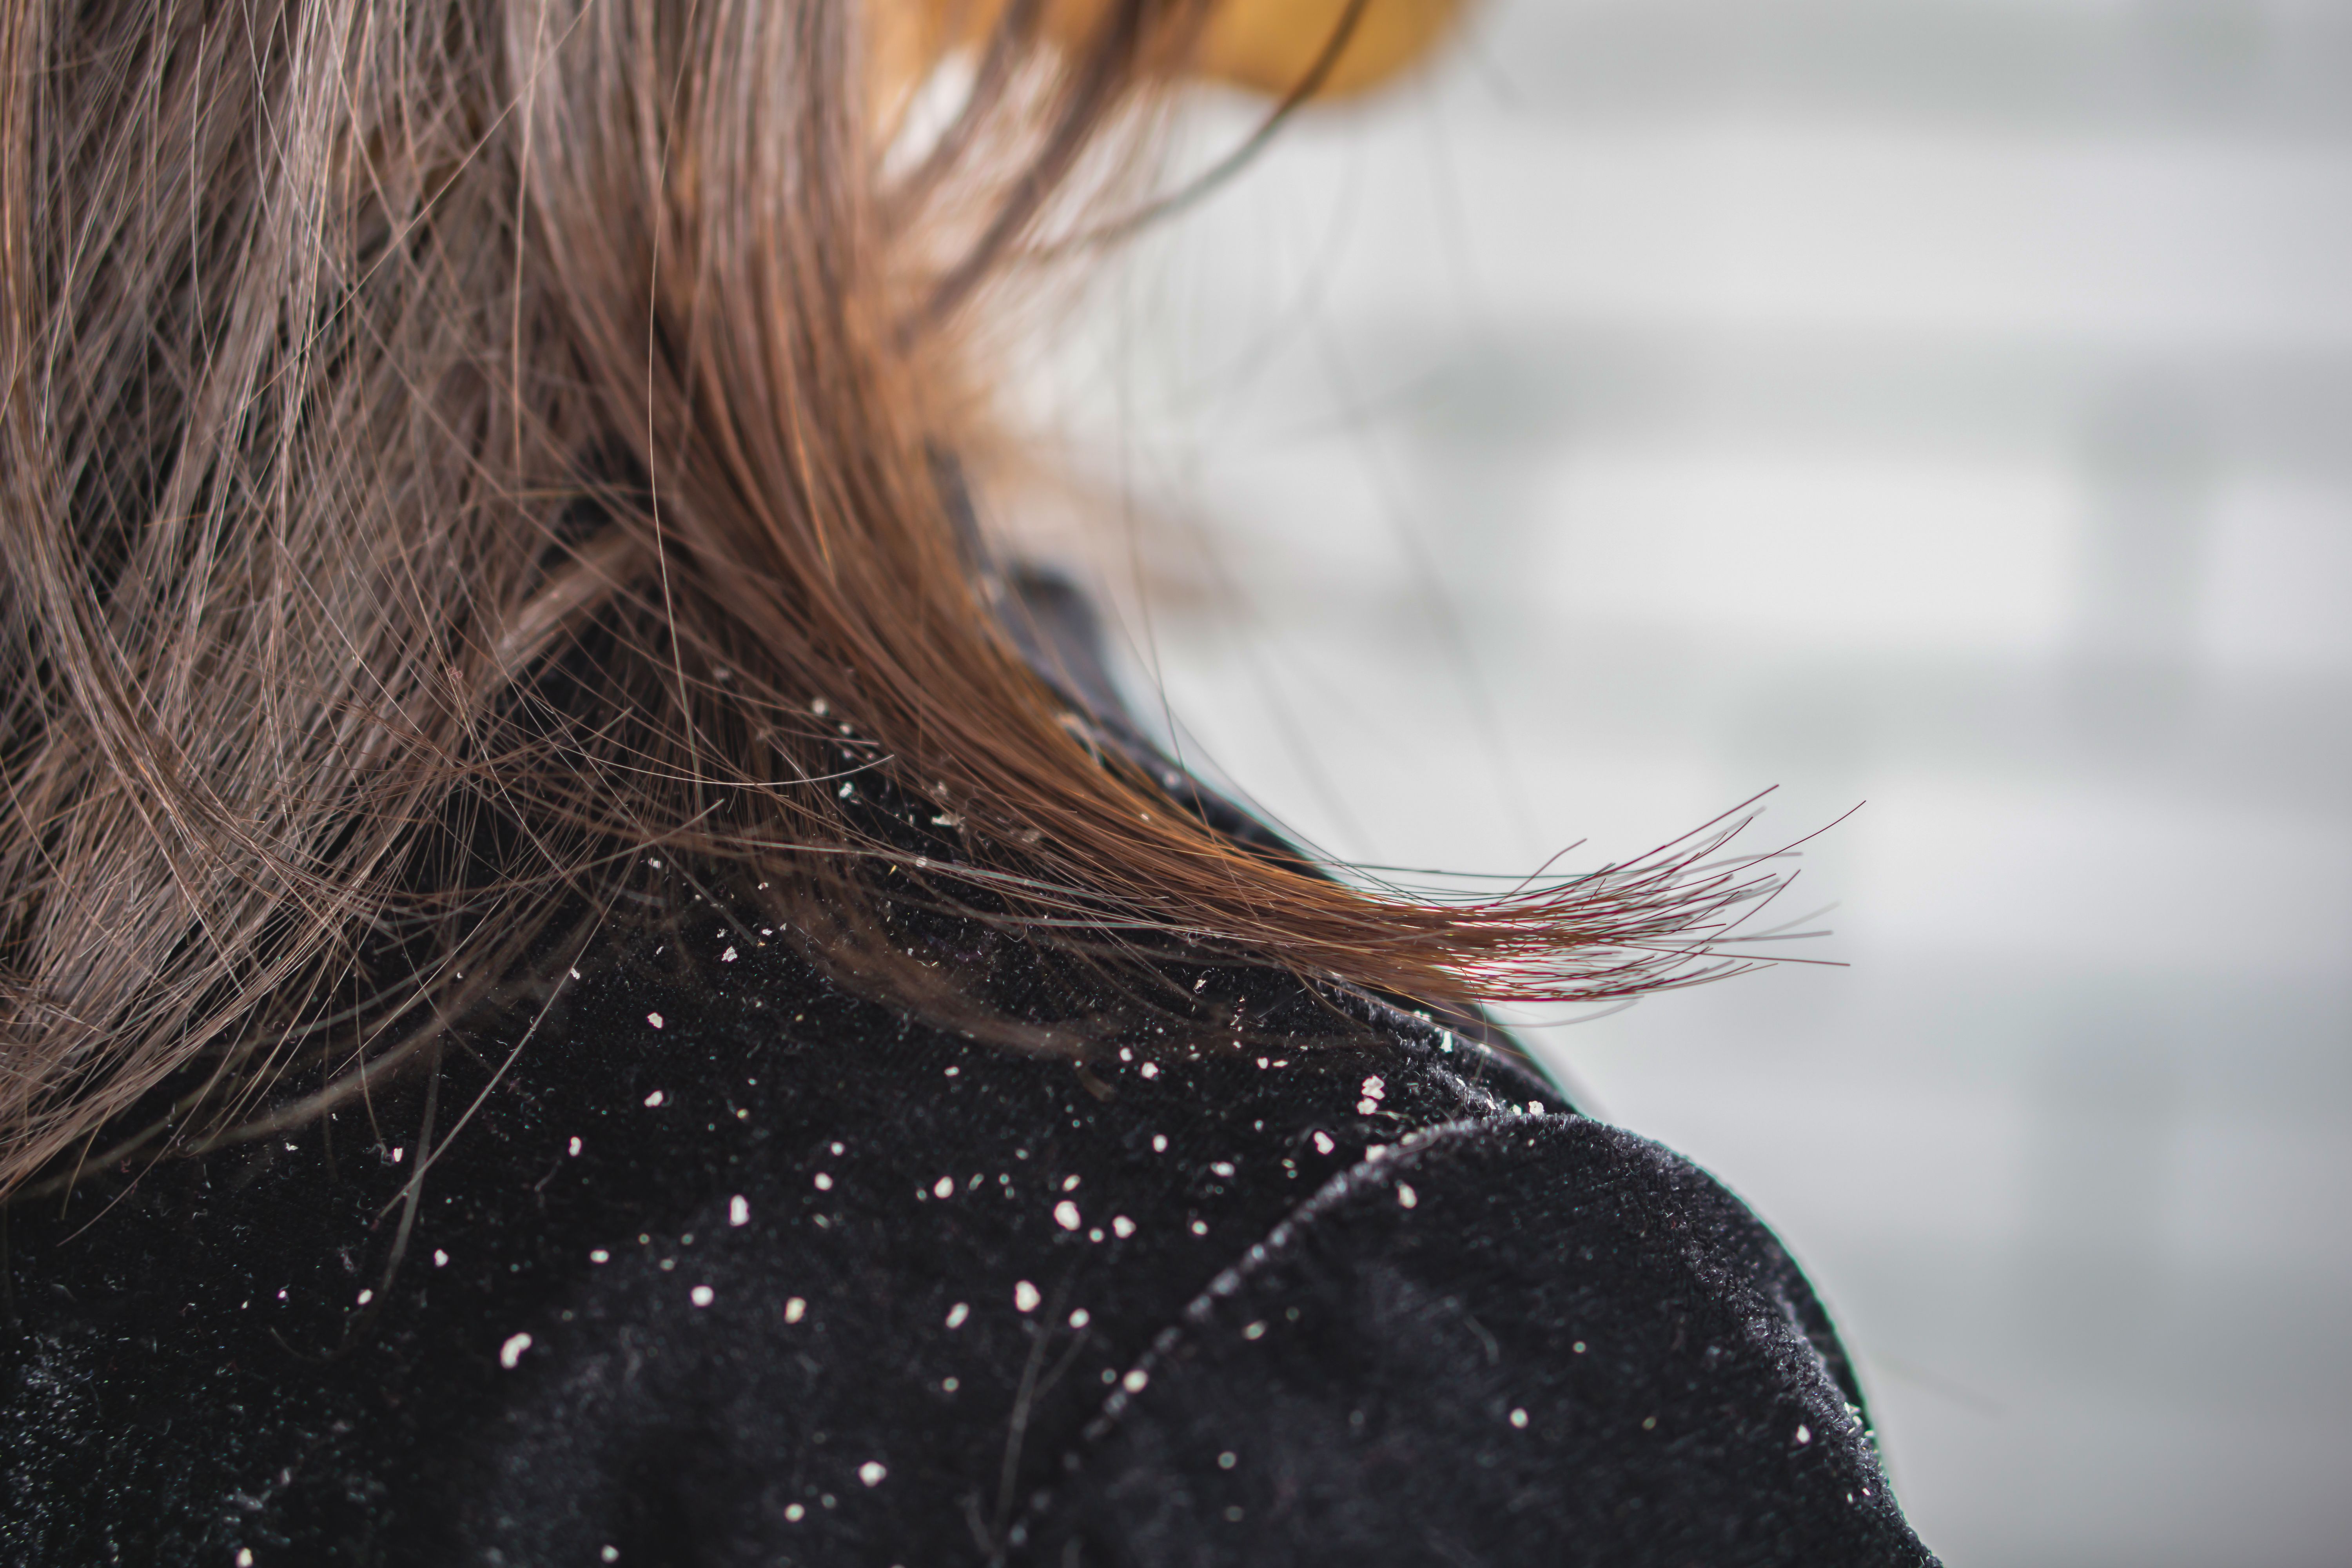 How to Cure Dandruff Permanently? Home remedies for dandruff